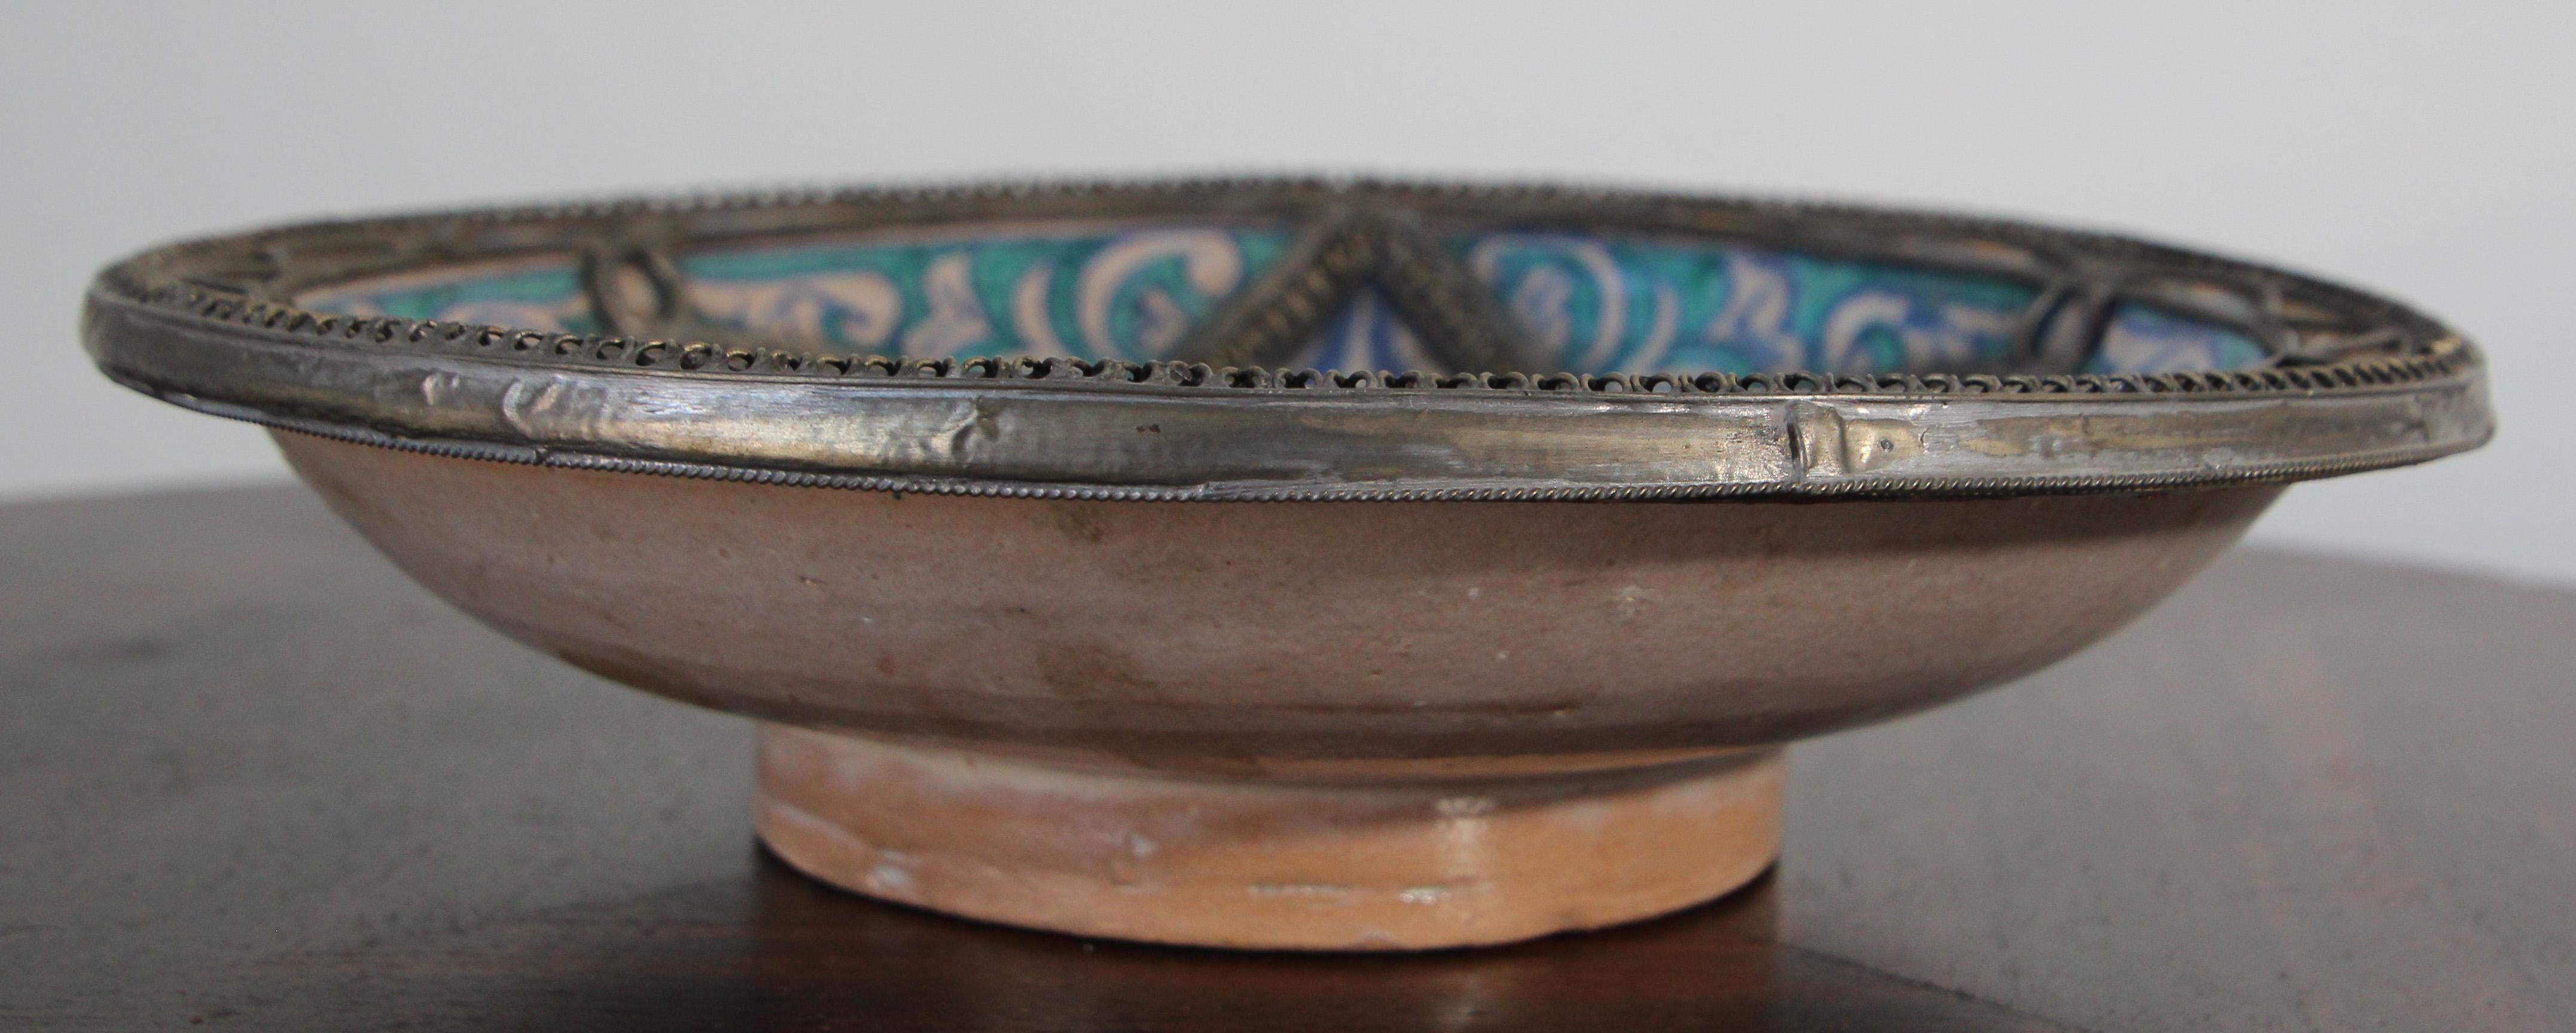 Antique Moroccan Ceramic Bowl Adorned with Moorish Silver Filigree from Fez For Sale 5